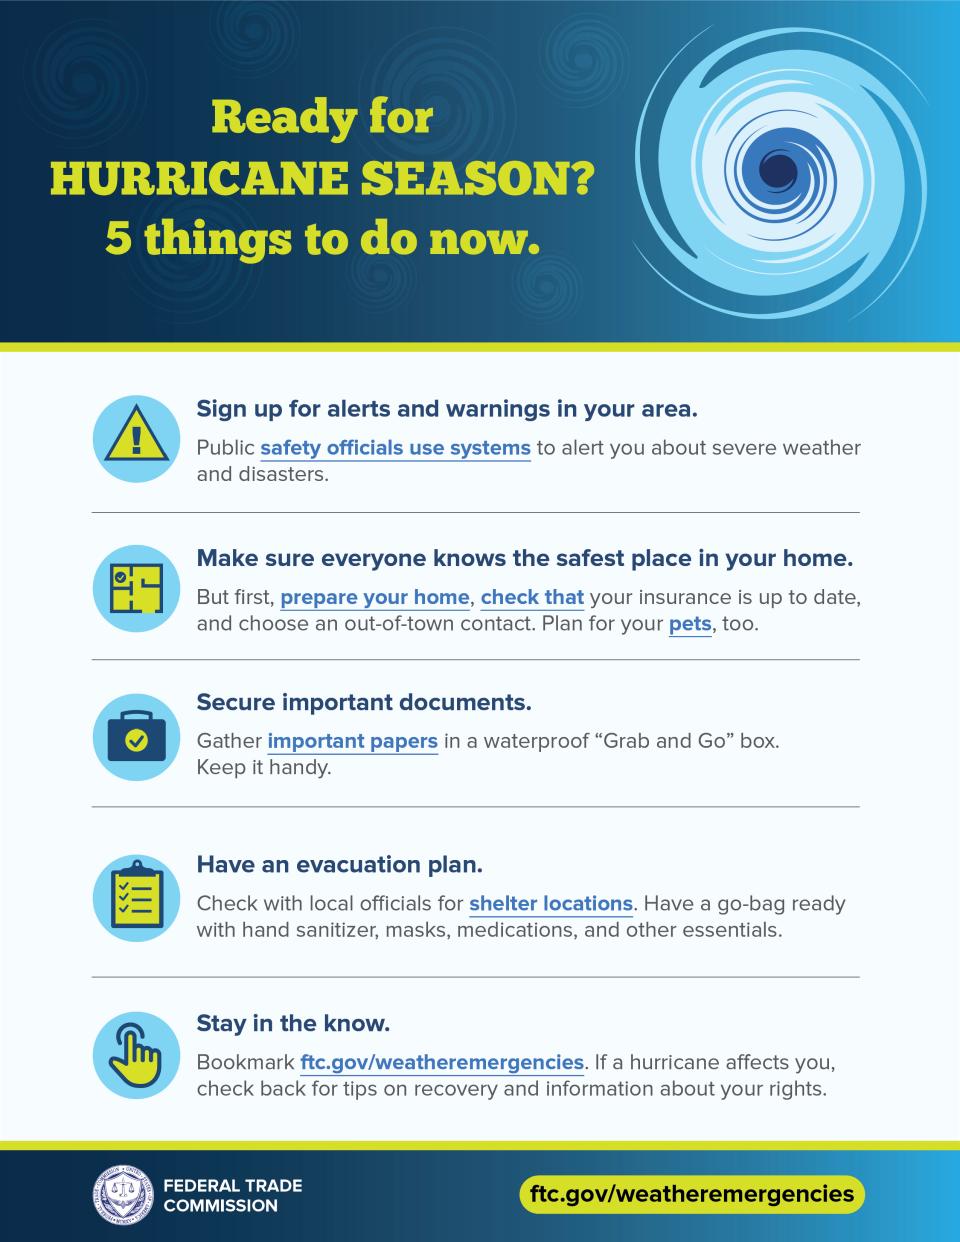 Ready for Hurricane Season? 5 Things to Do Now. Infographic